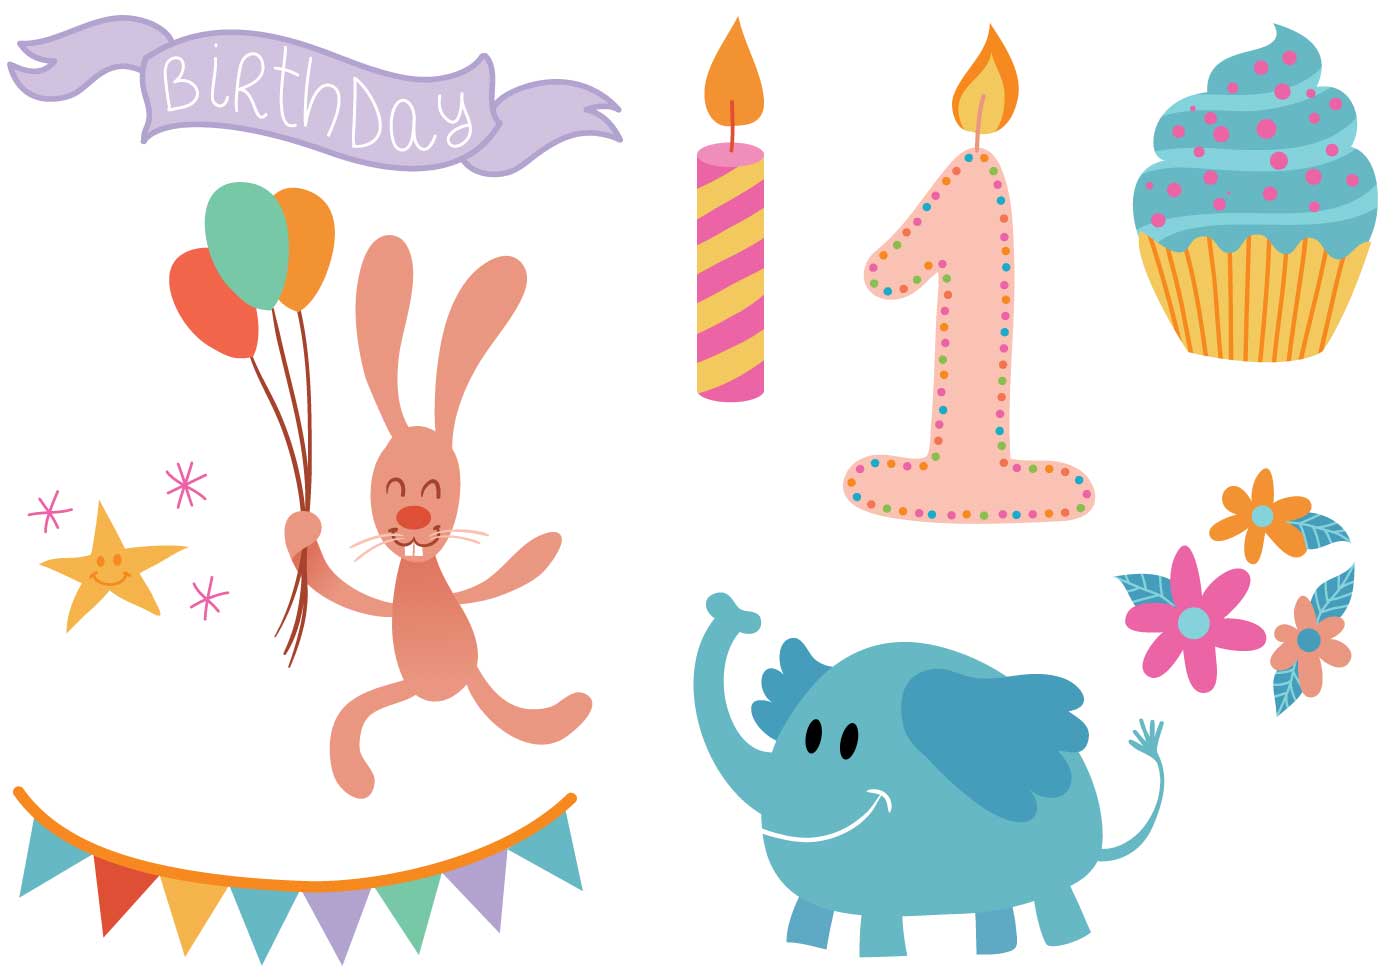 Download Birthday Candle Free Vector Art - (7,212 Free Downloads)